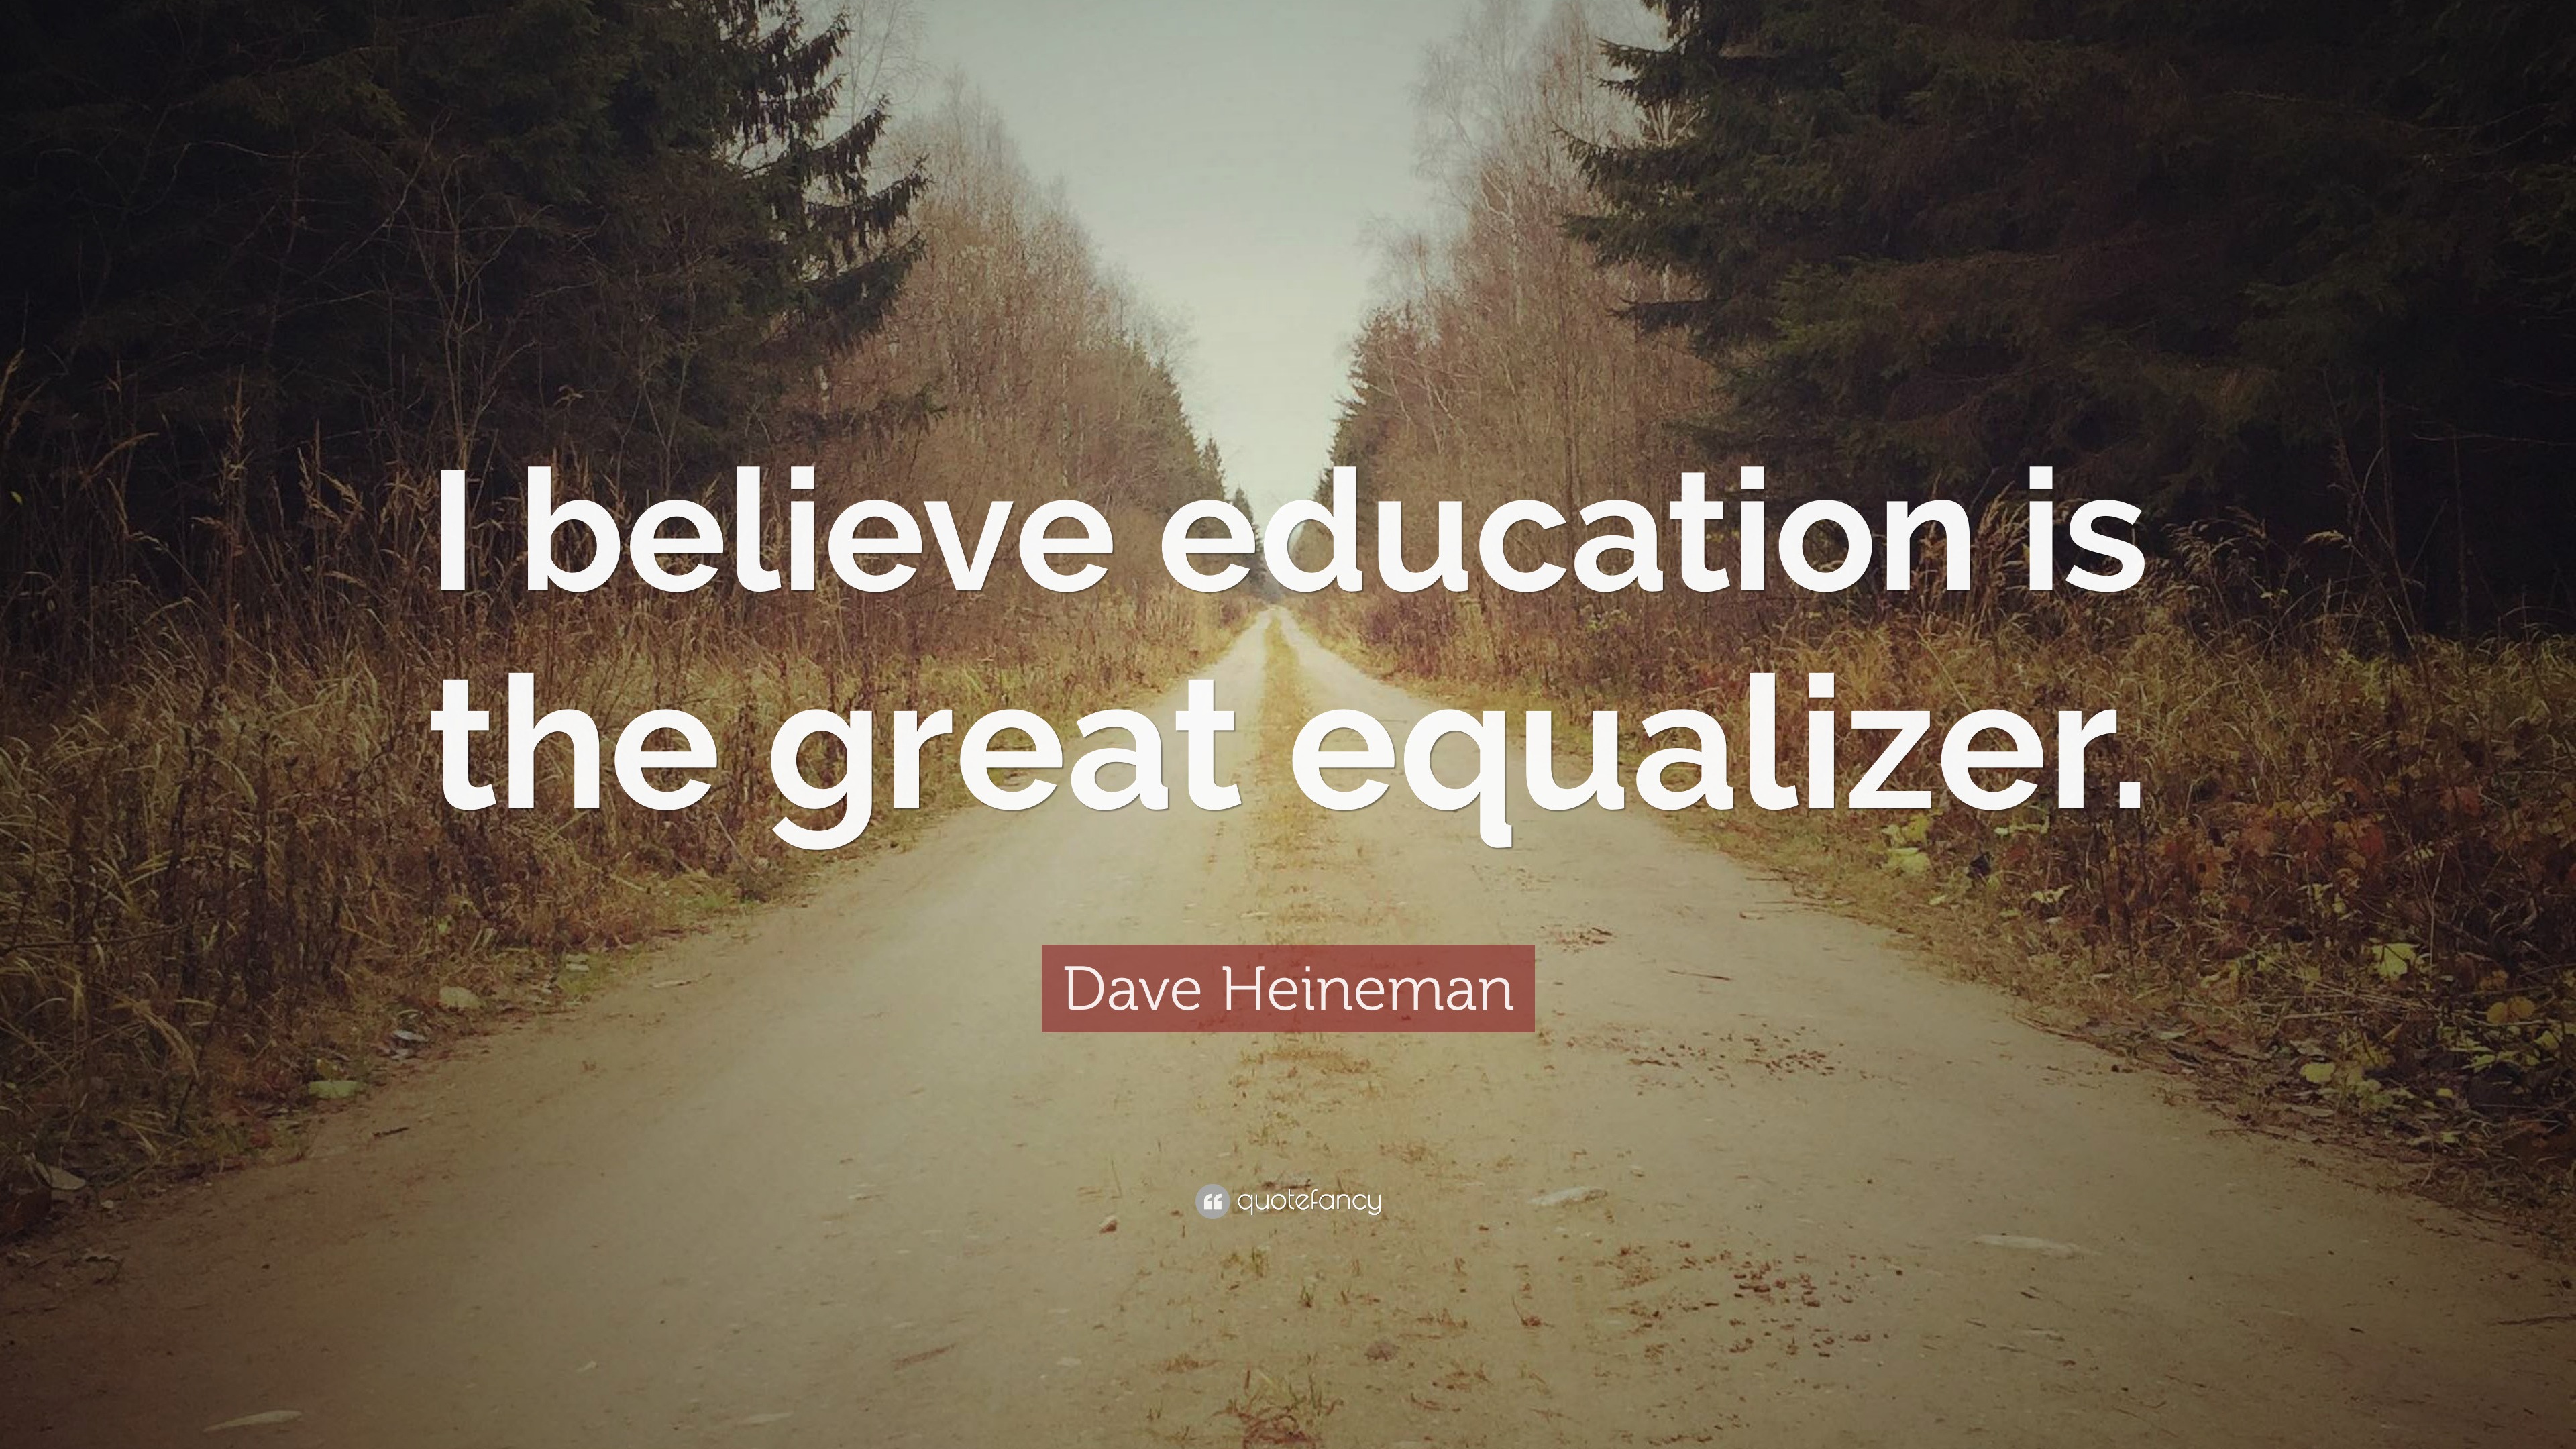 Dave Heineman Quote: “I believe education is the great equalizer.”